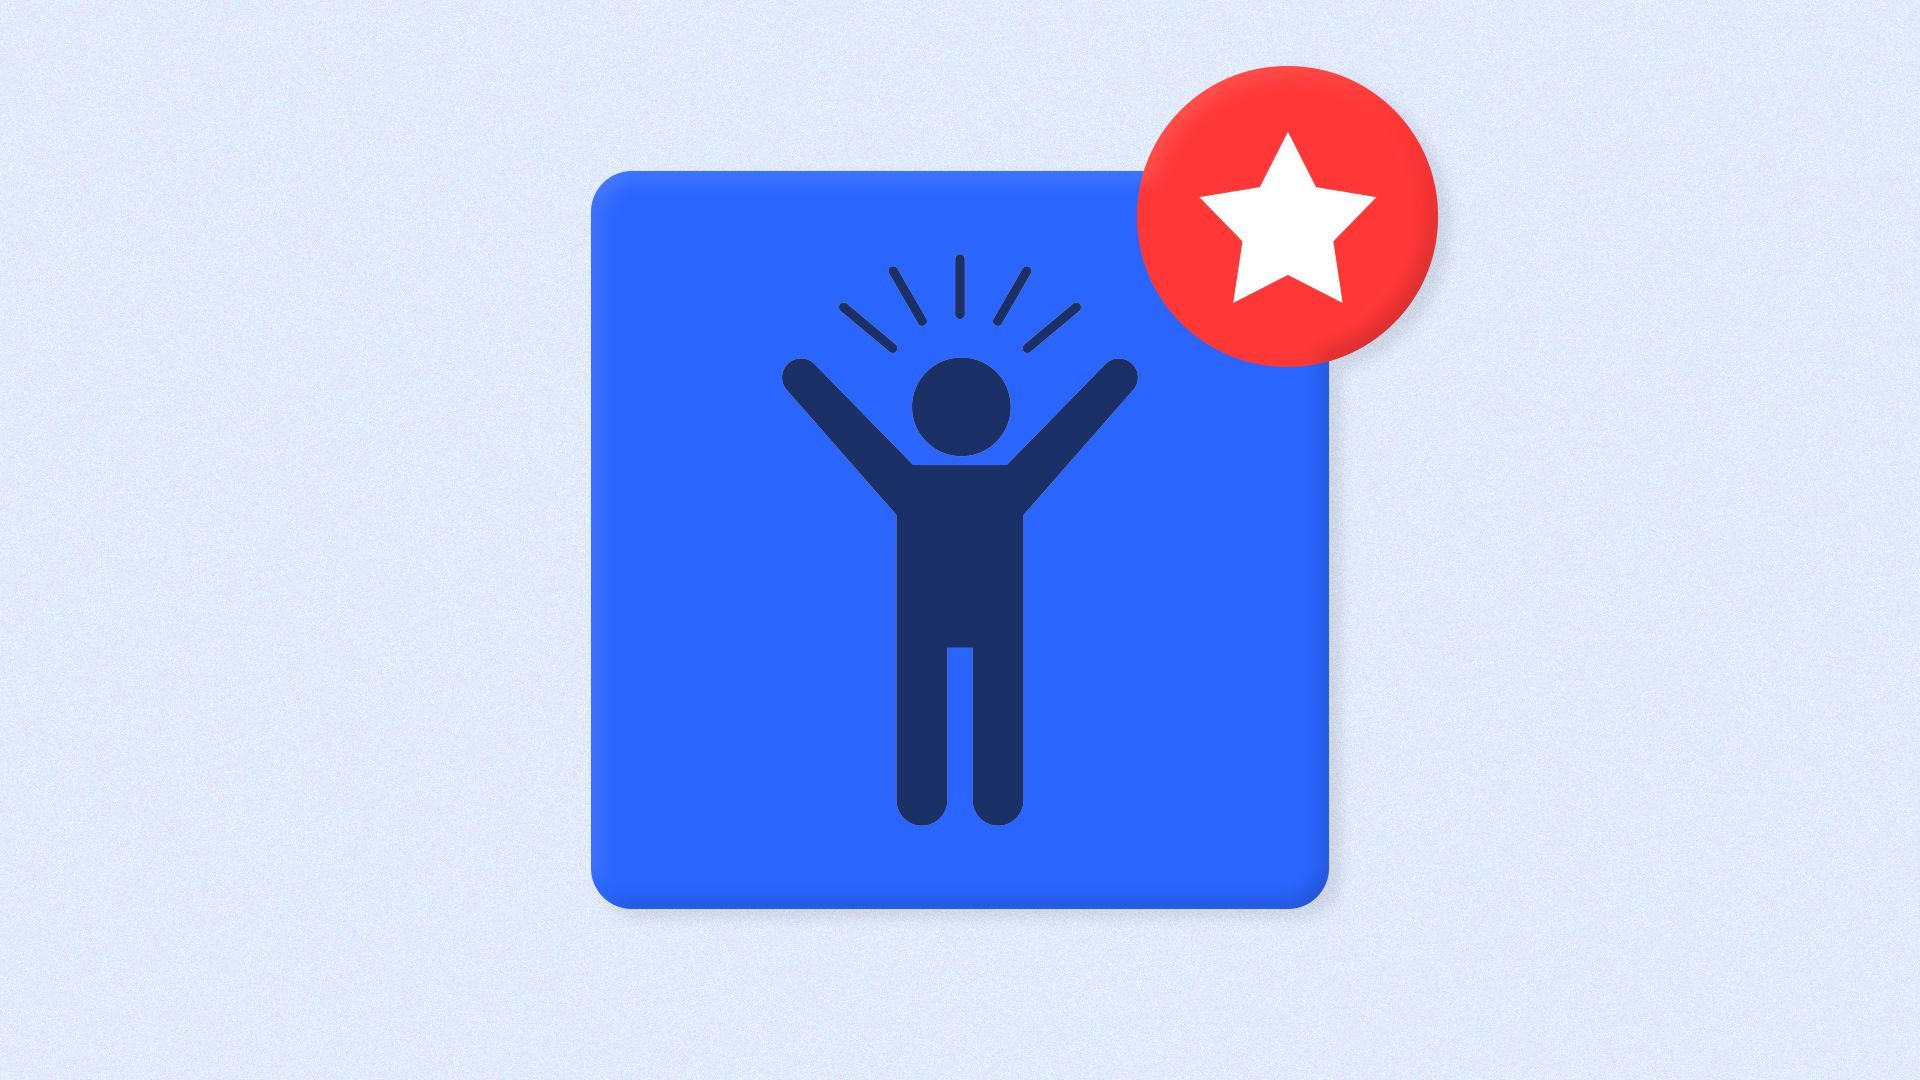 Illustration of an app square with an icon of a healthy person, and a red notification circle with a star.